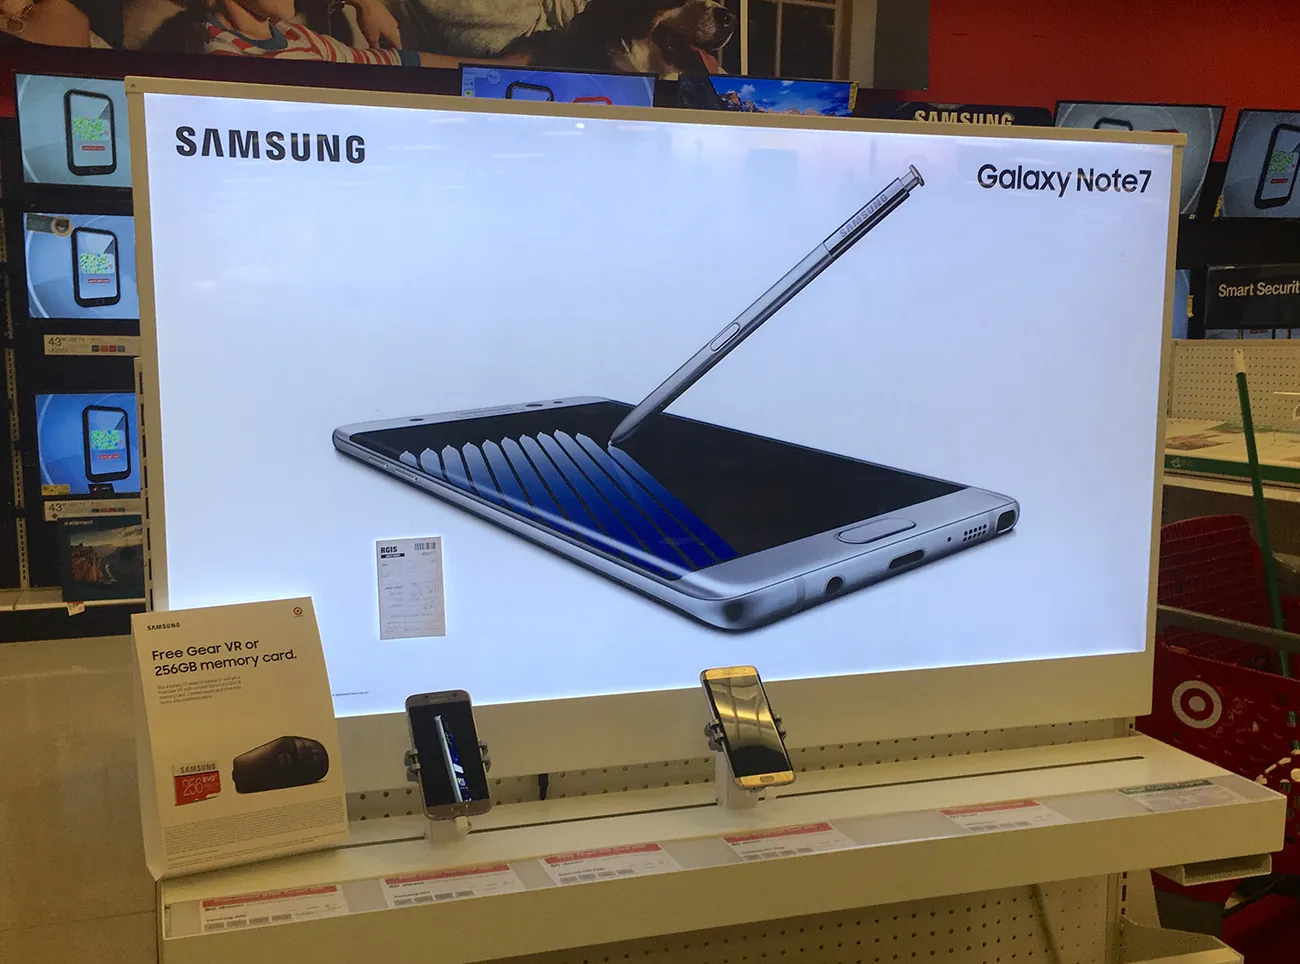 A photograph shows a large display of the Samsung Galaxy note smart phone, with a stylus pen touching the screen.